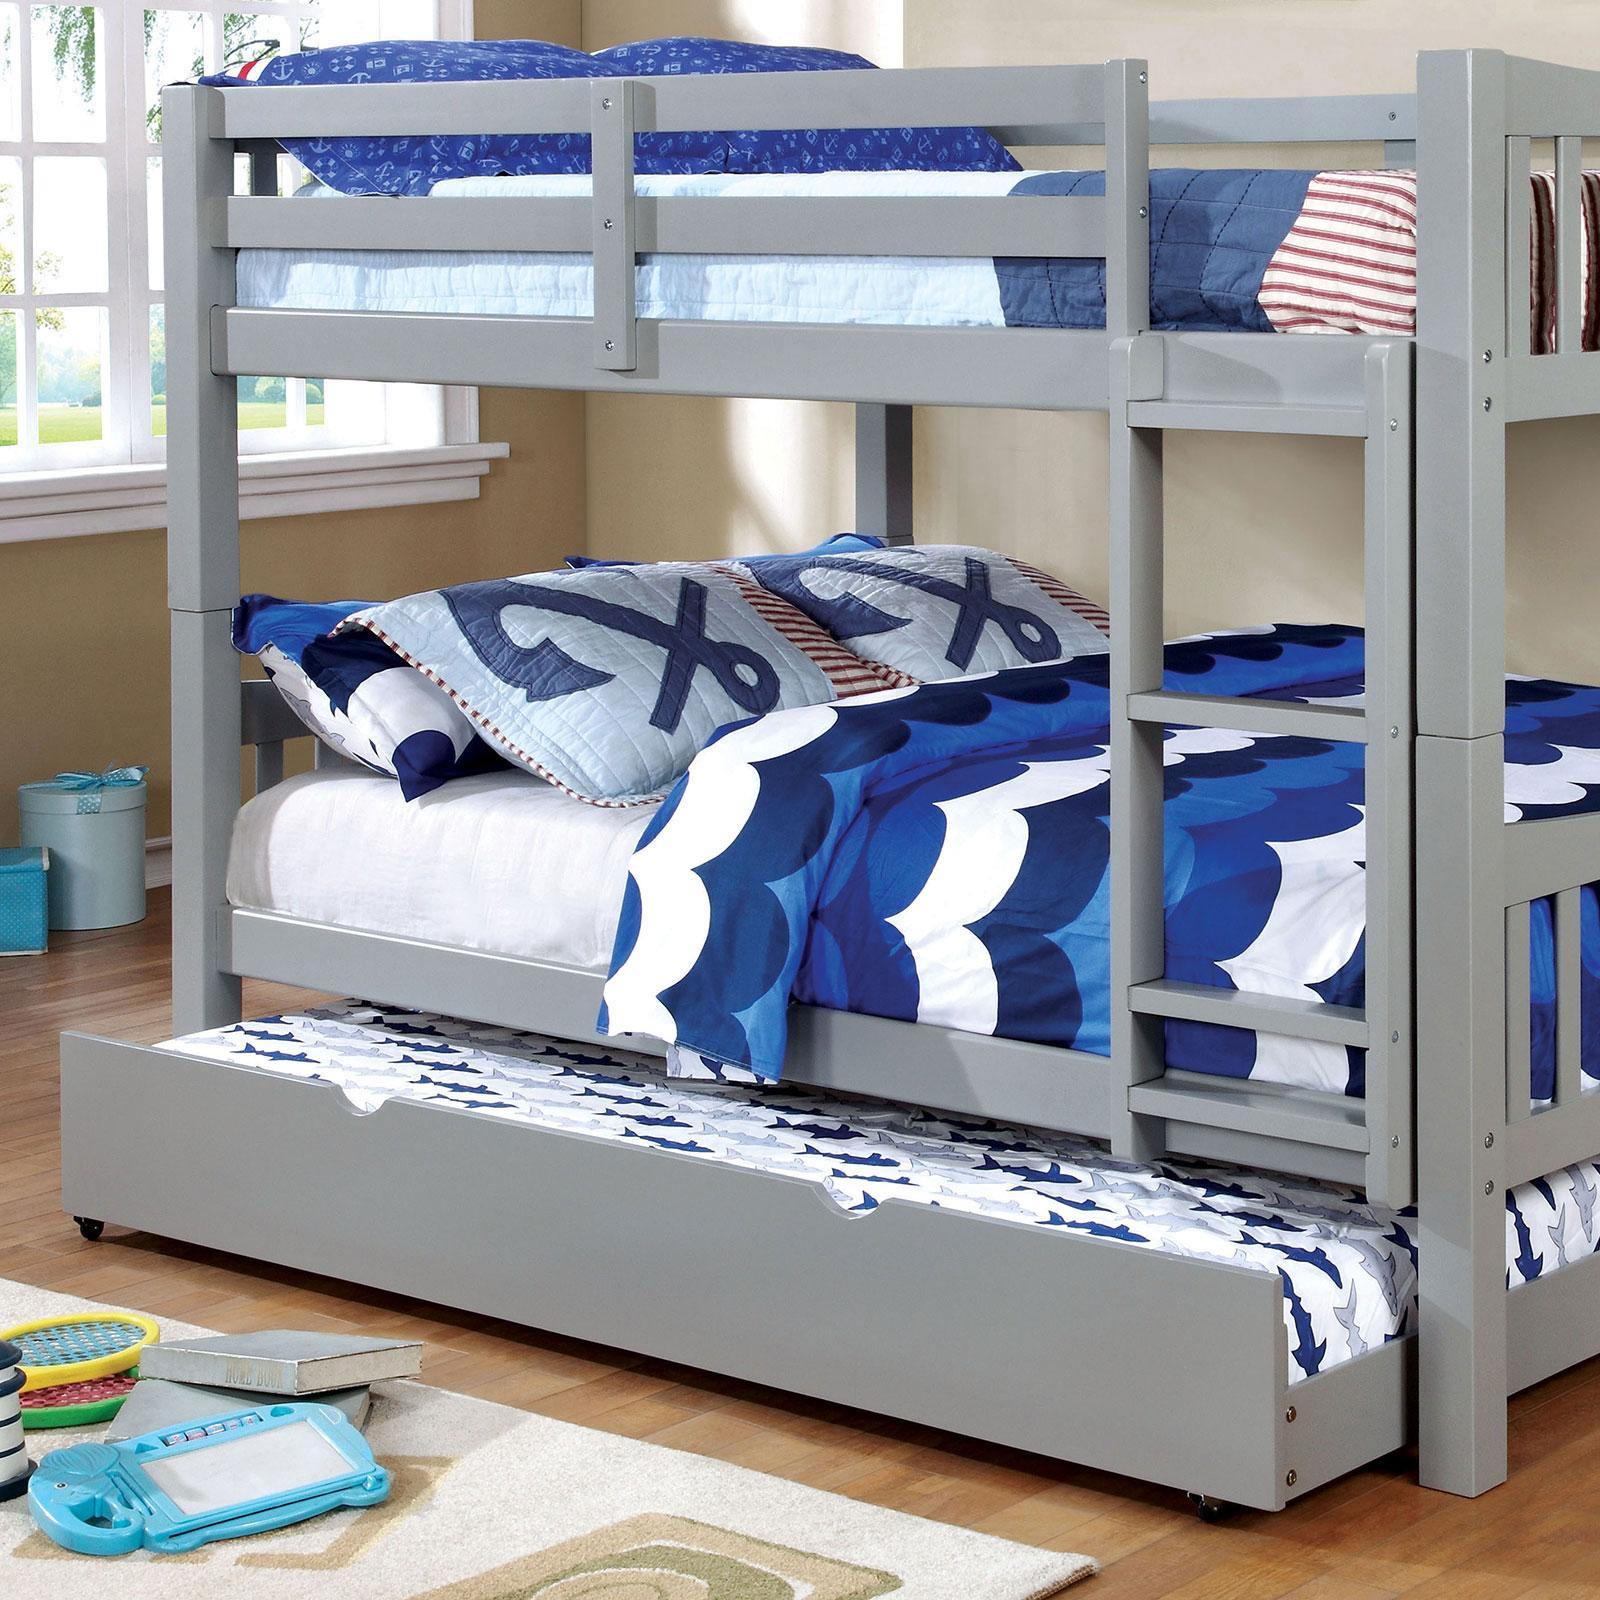 

    
Furniture of America CAMERON CM-BK929F-GY Bunk Bed Gray CM-BK929F-GY-BED
